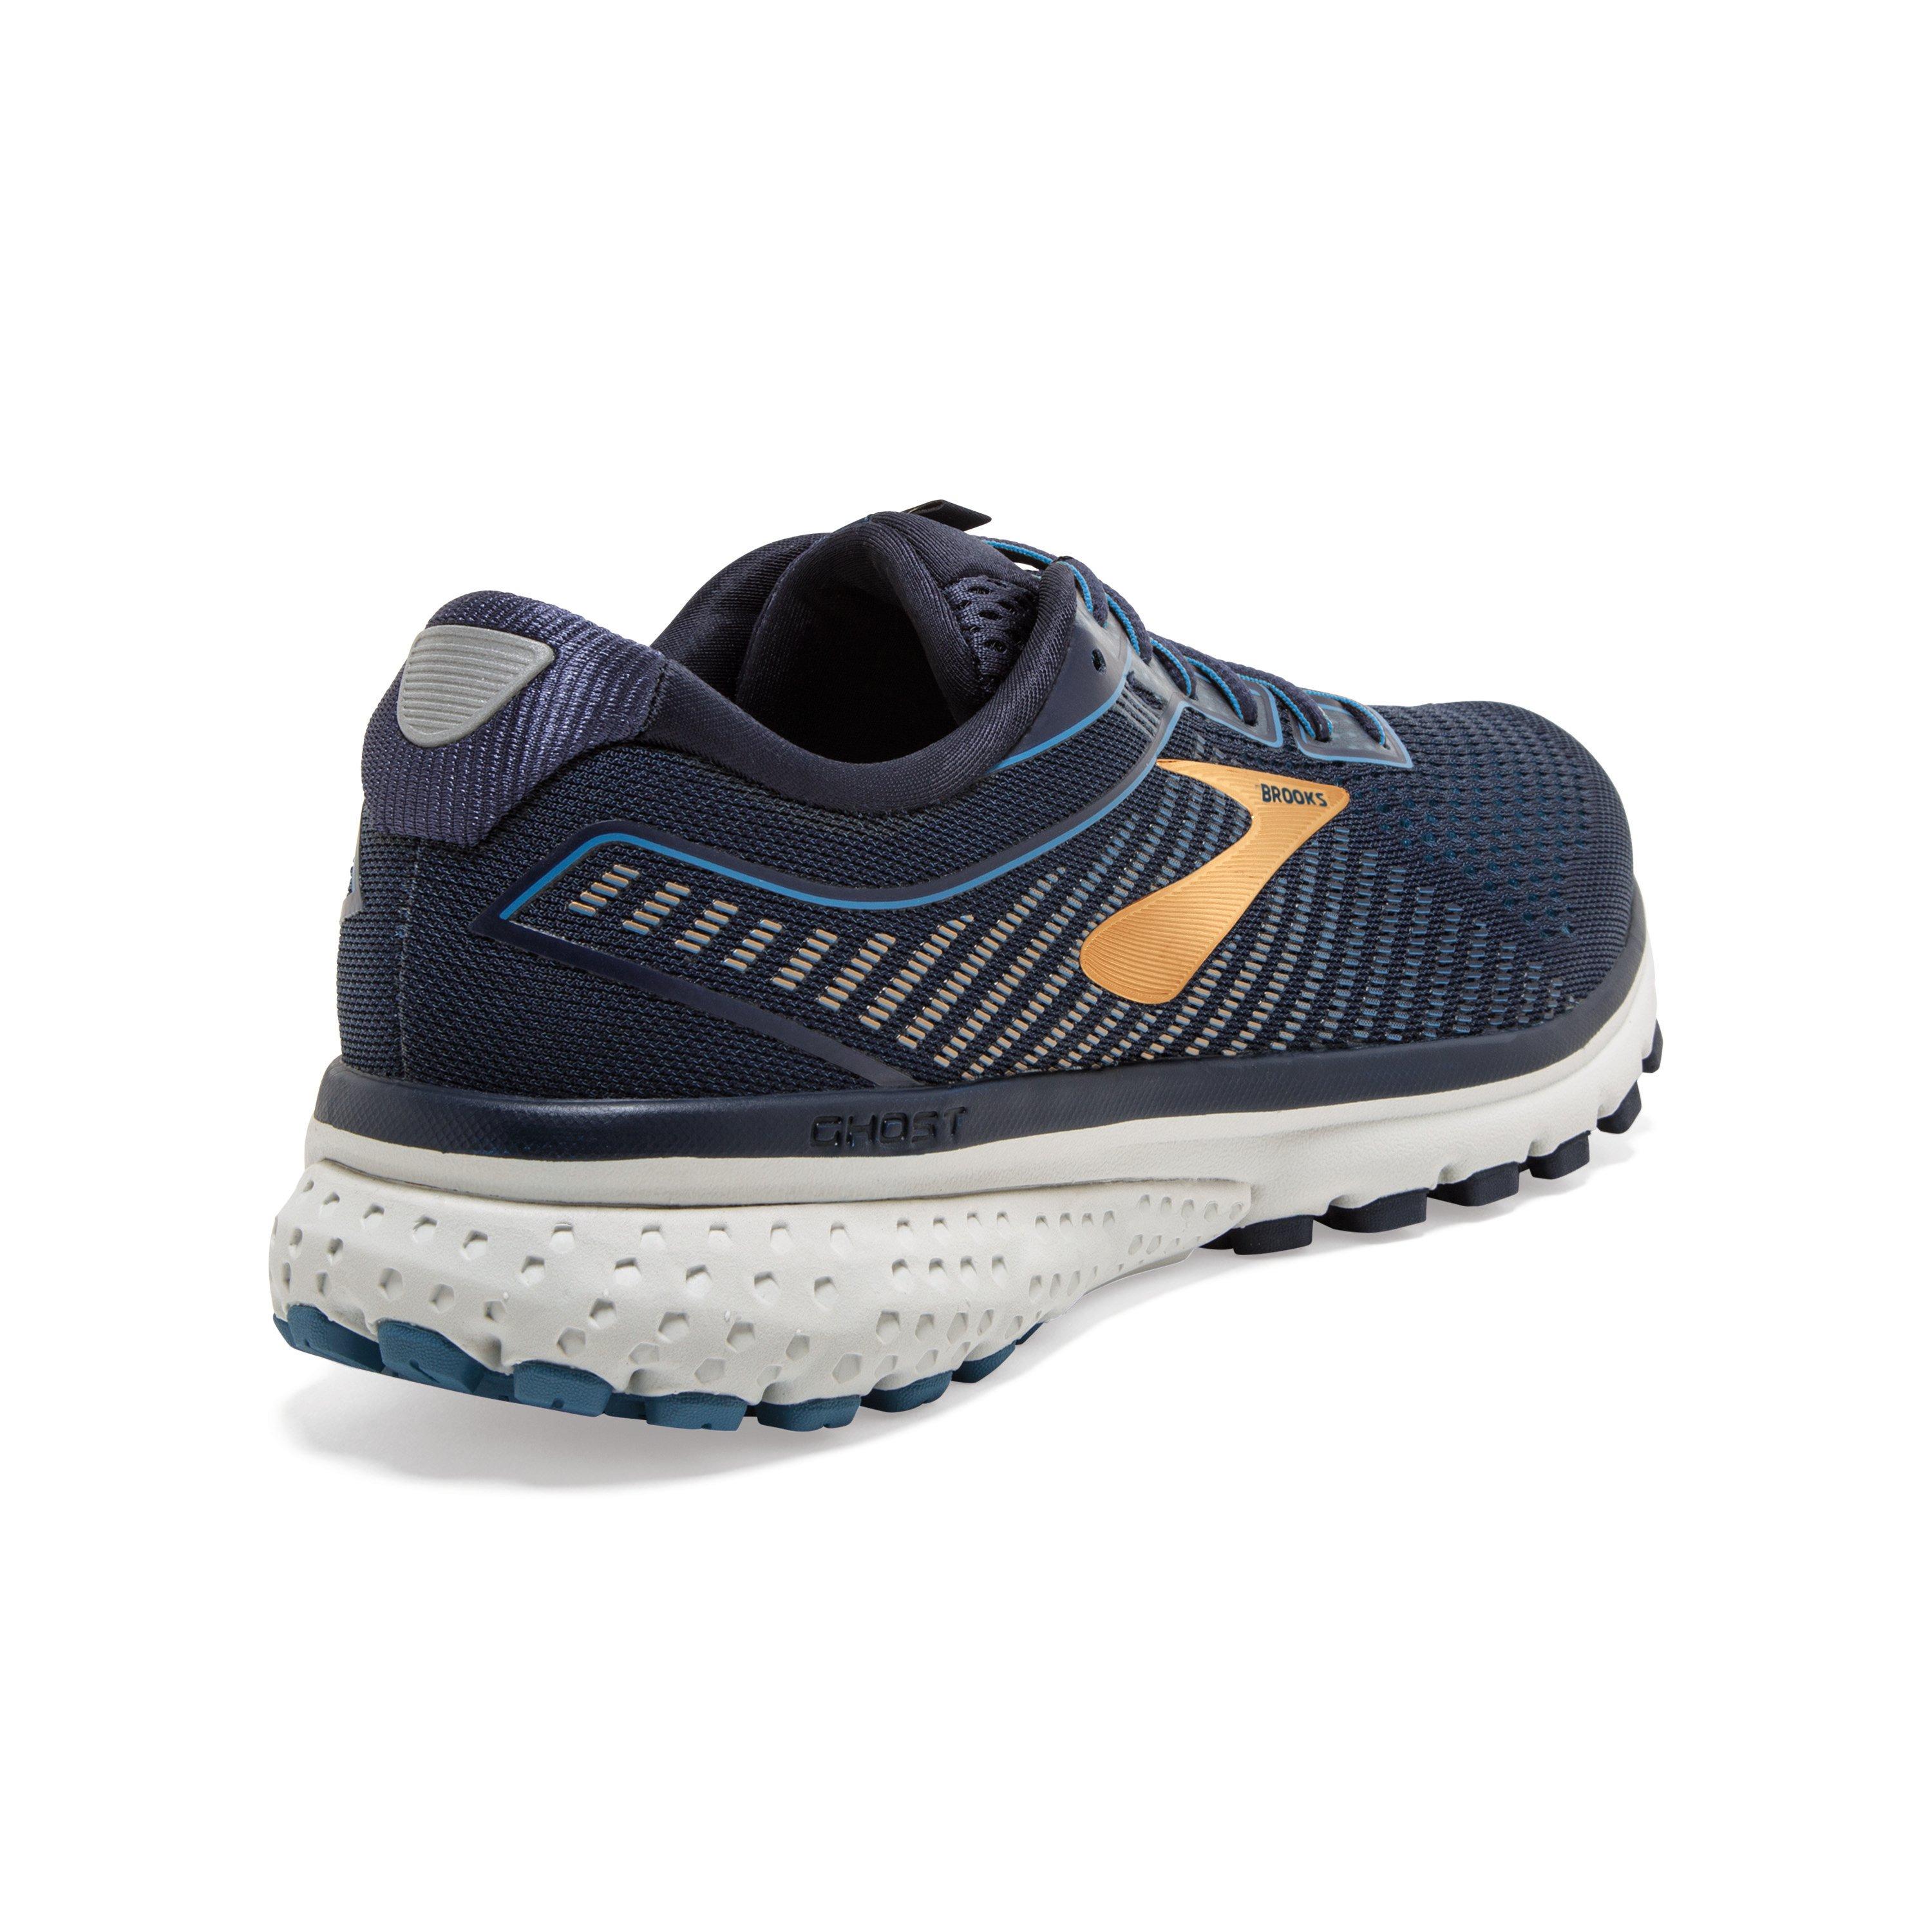 12.5 4E XW Navy/Gold US Brooks Men's Ghost 12 Running Shoes 